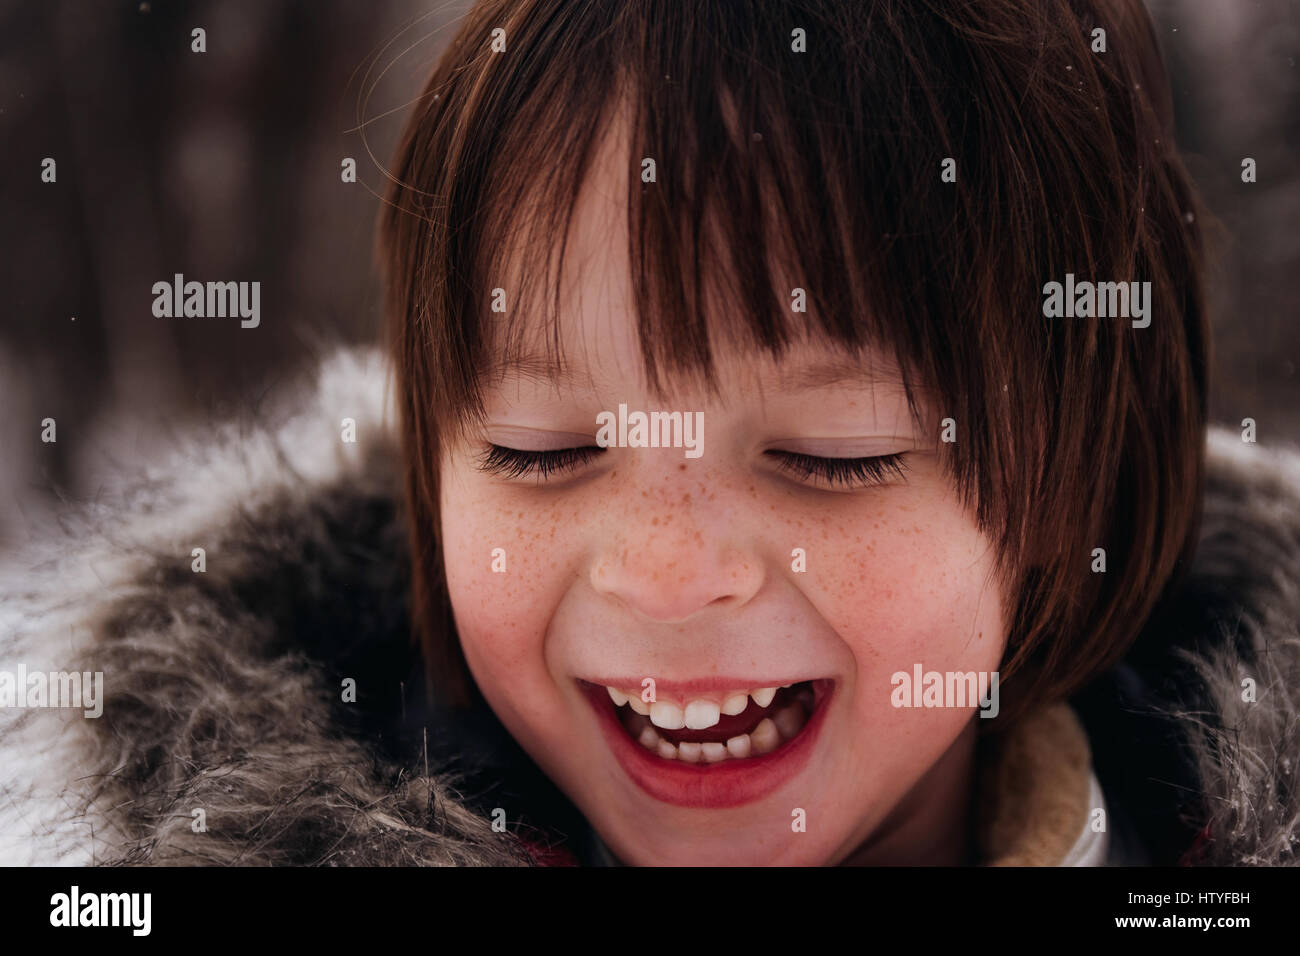 Close-up portrait of  girl outside laughing Stock Photo